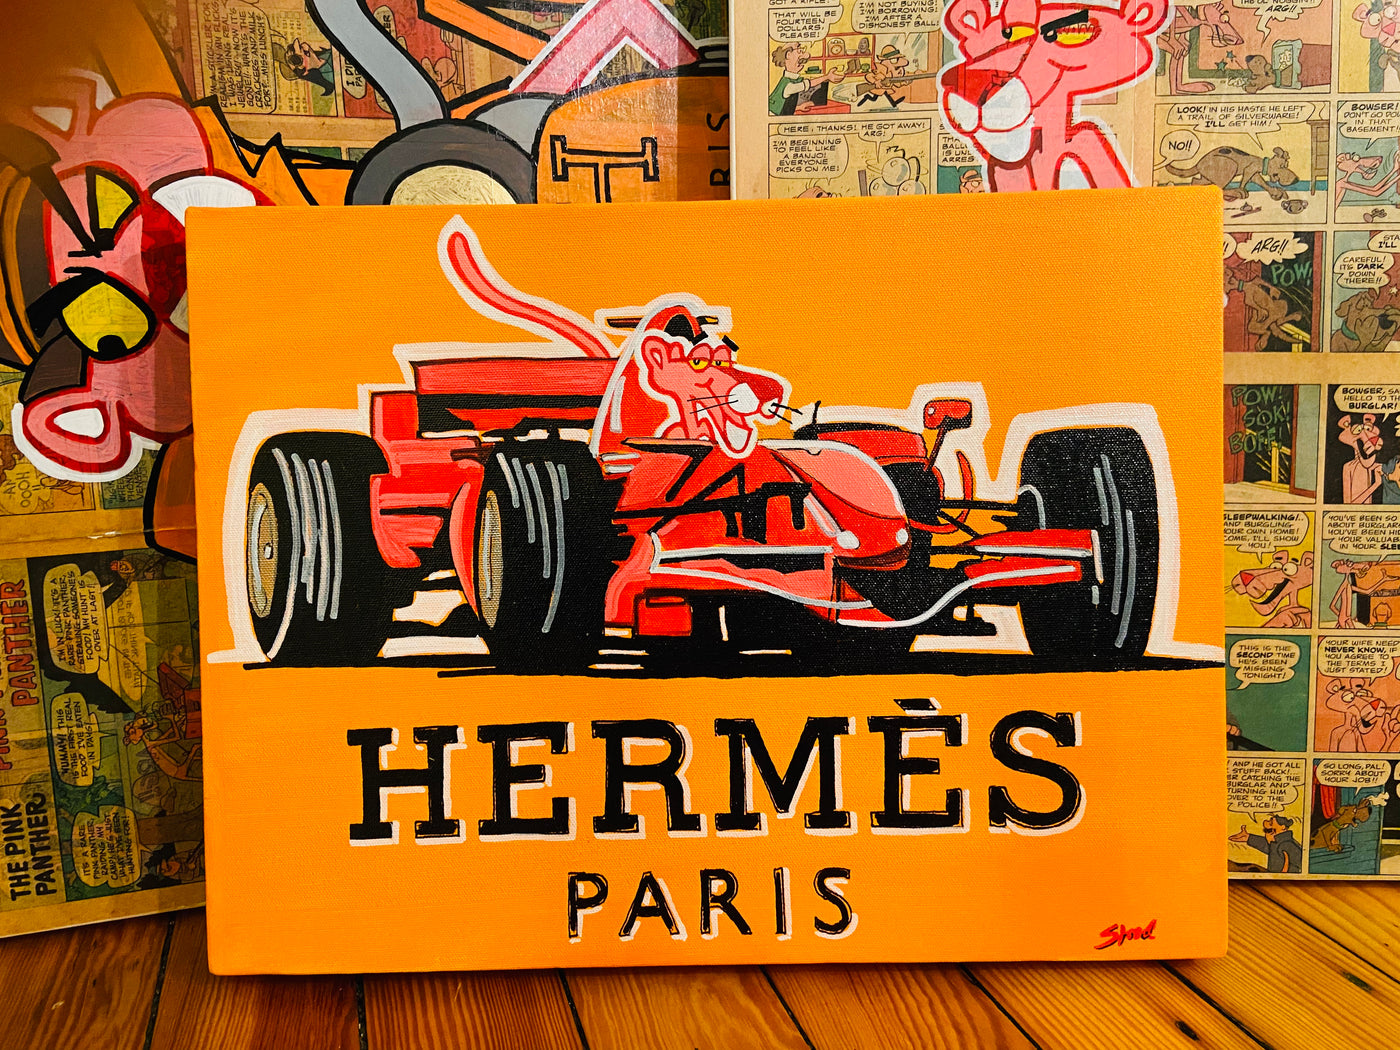 Pink Panther In Hermés Formula One by PeterStridArt